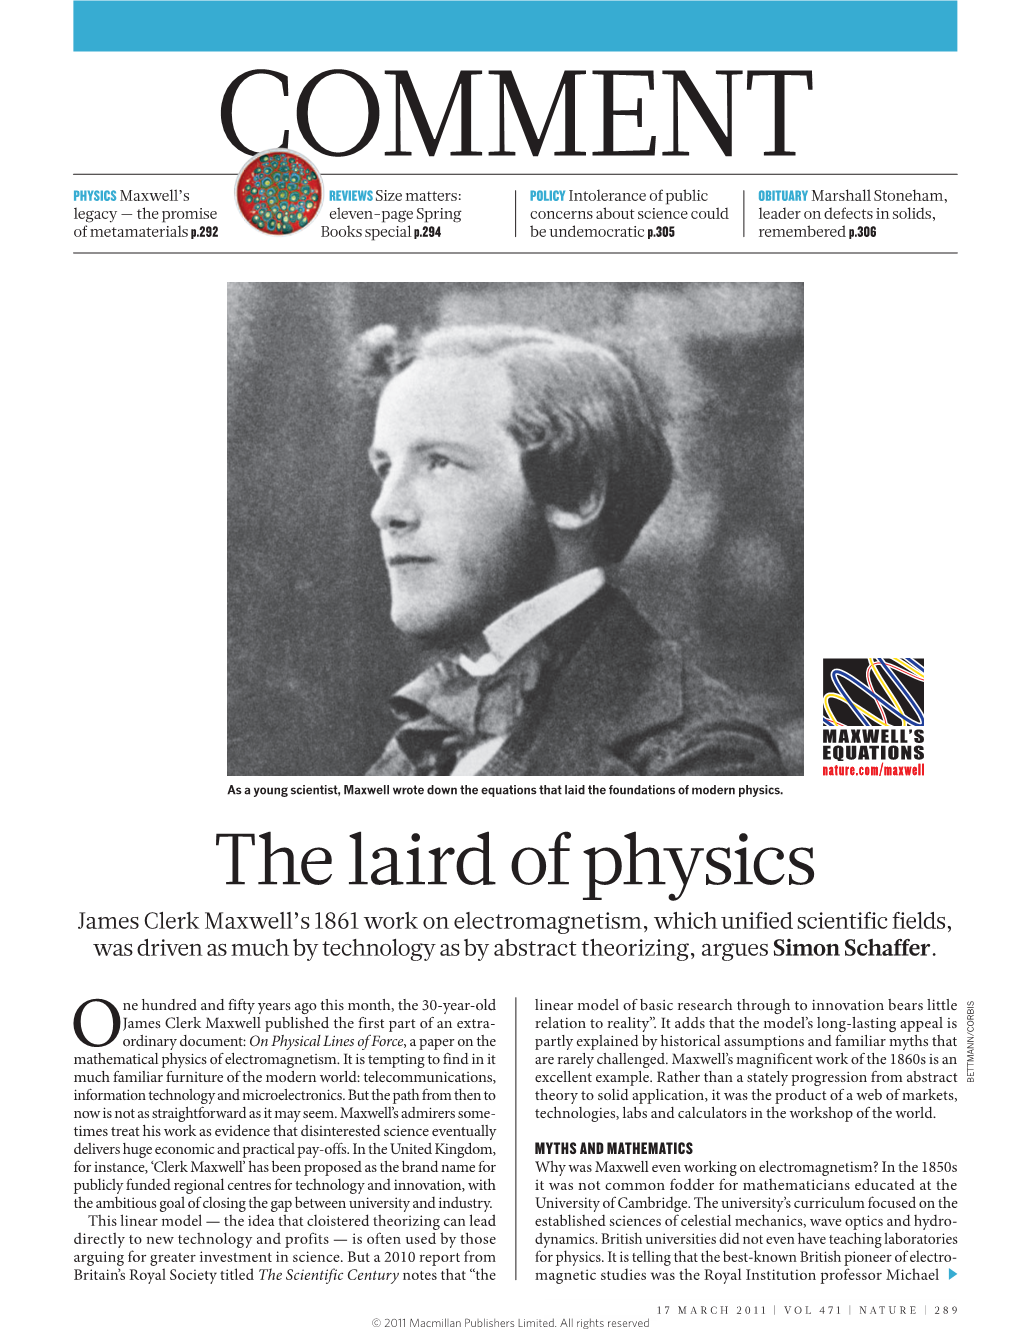 The Laird of Physics